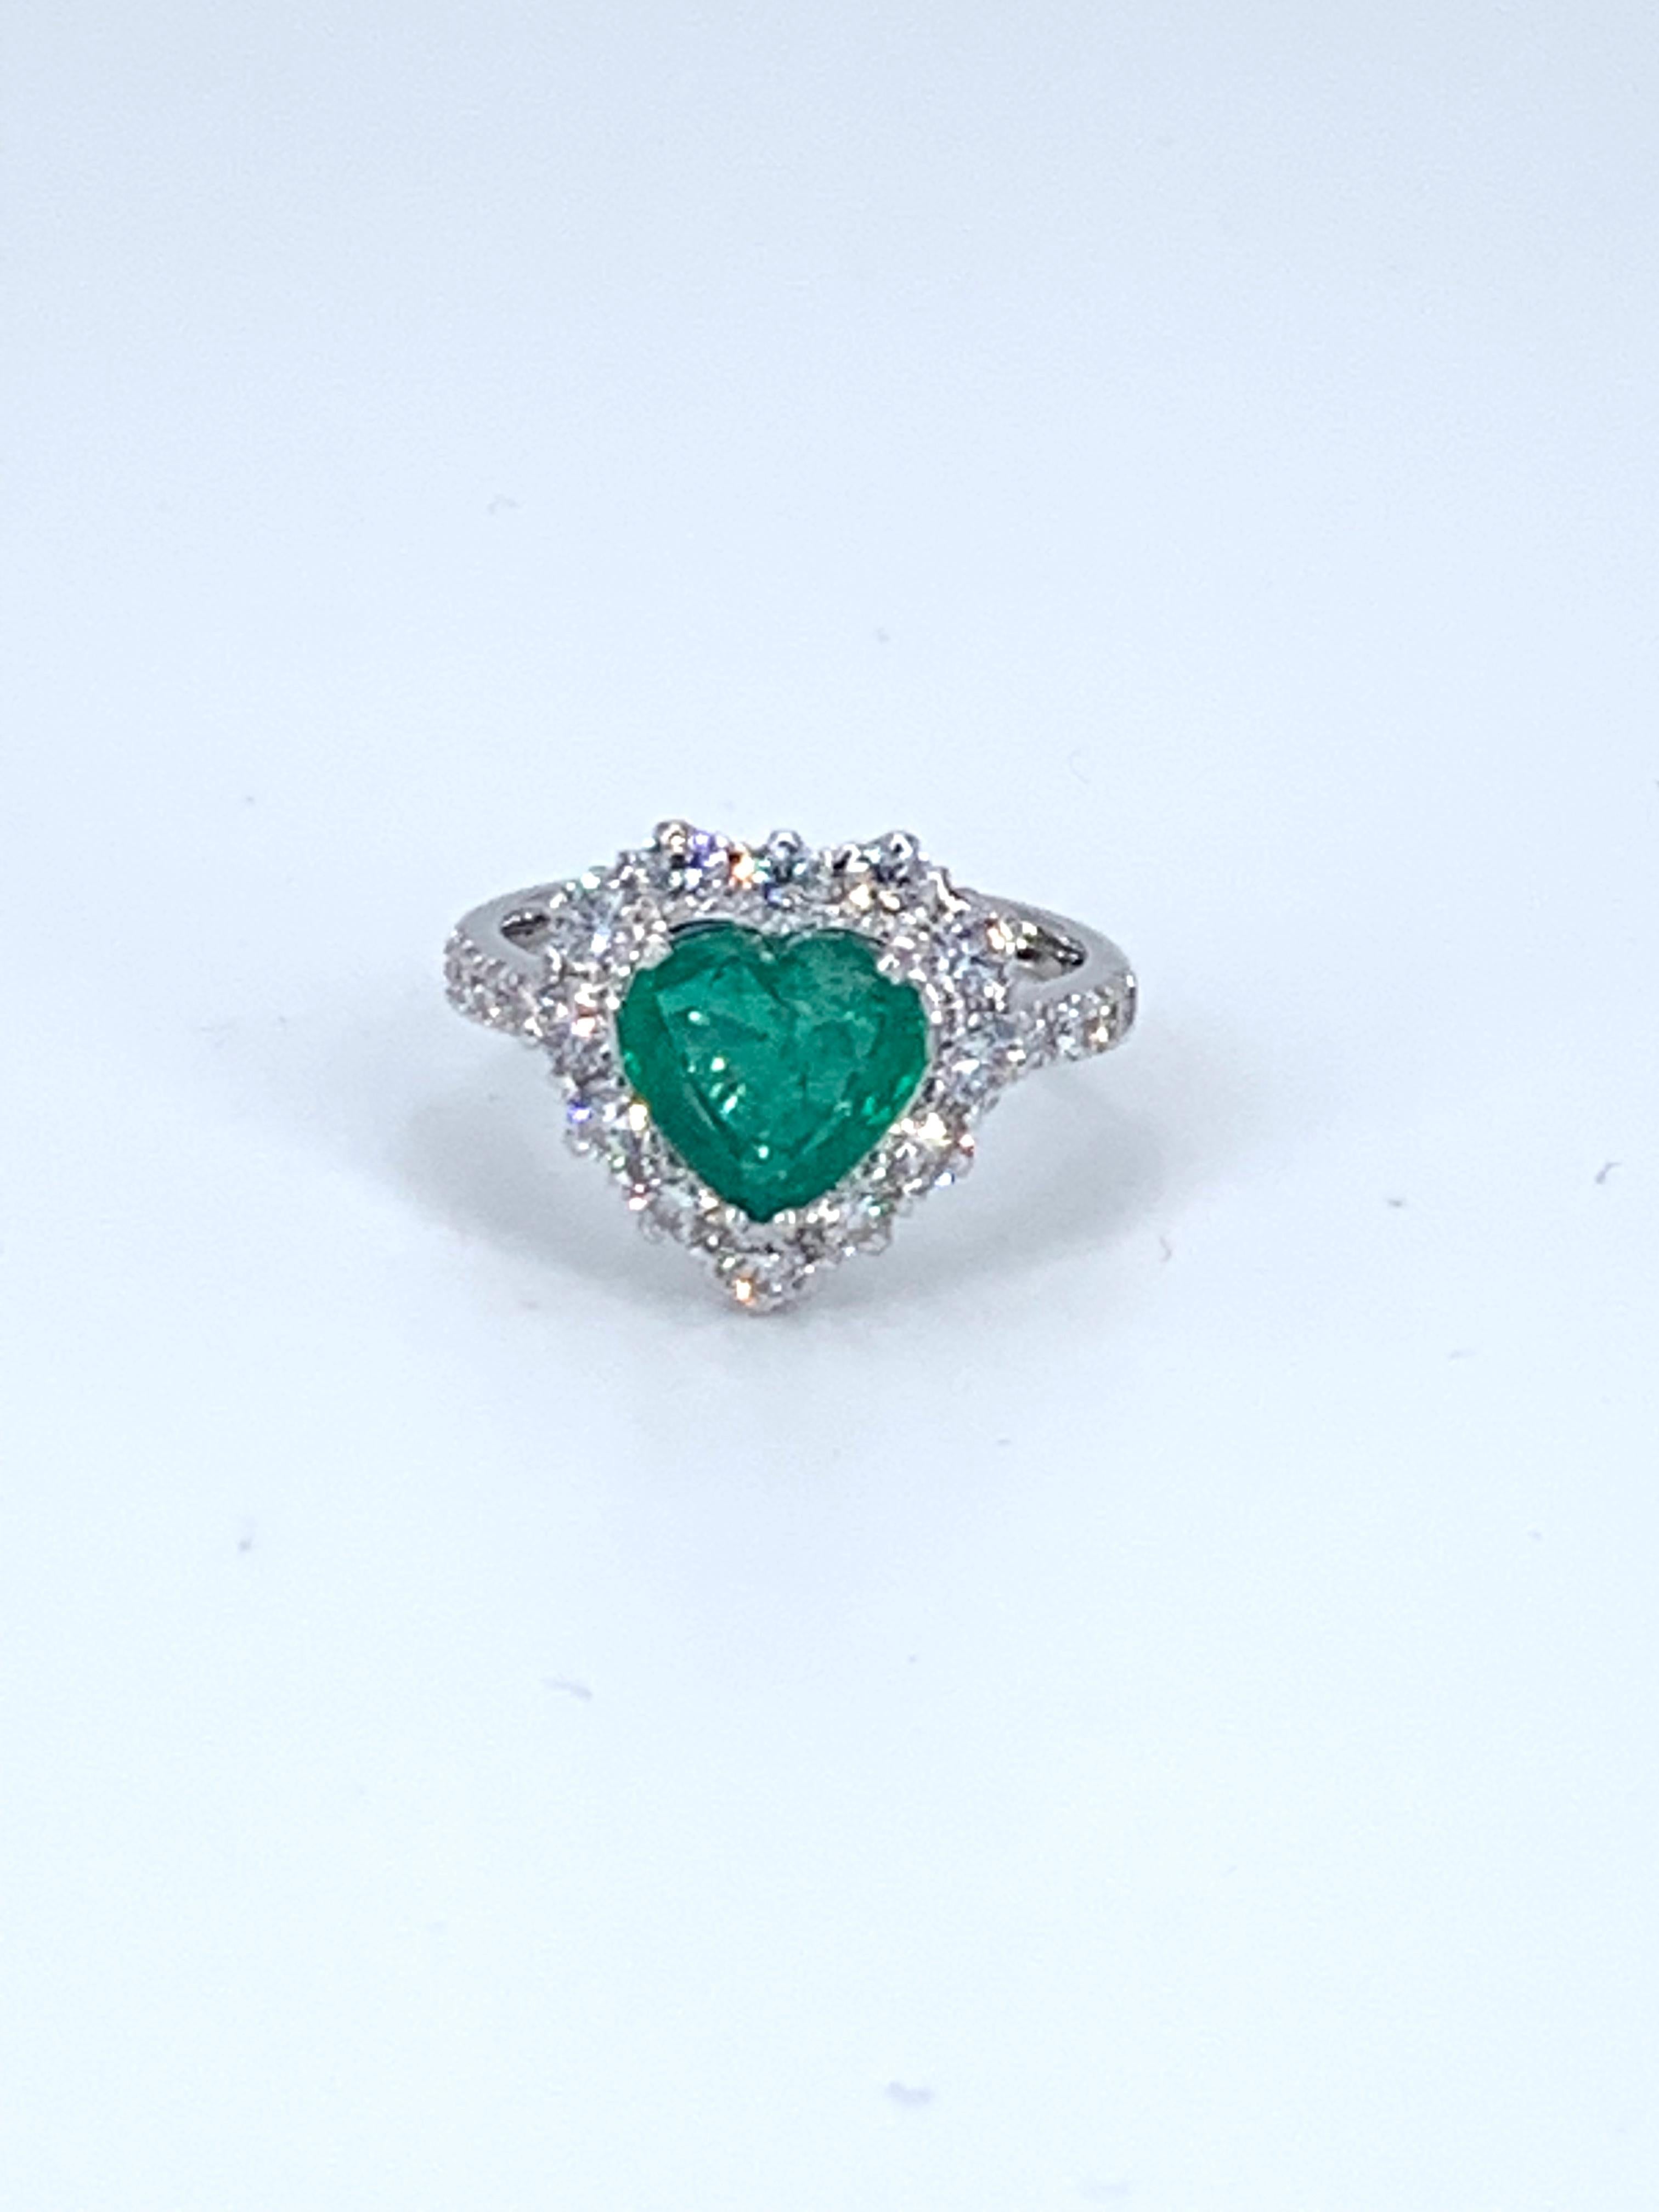 This romantic and stunning 7.32 Carat Emerald heart ring is surrounded by 3.75 Carats of natural white Diamonds. 

Set in 18Kt white Gold, the Diamond can be gifted as a unique engagement ring, or purely an exquisite cocktail ring. 

The perfect